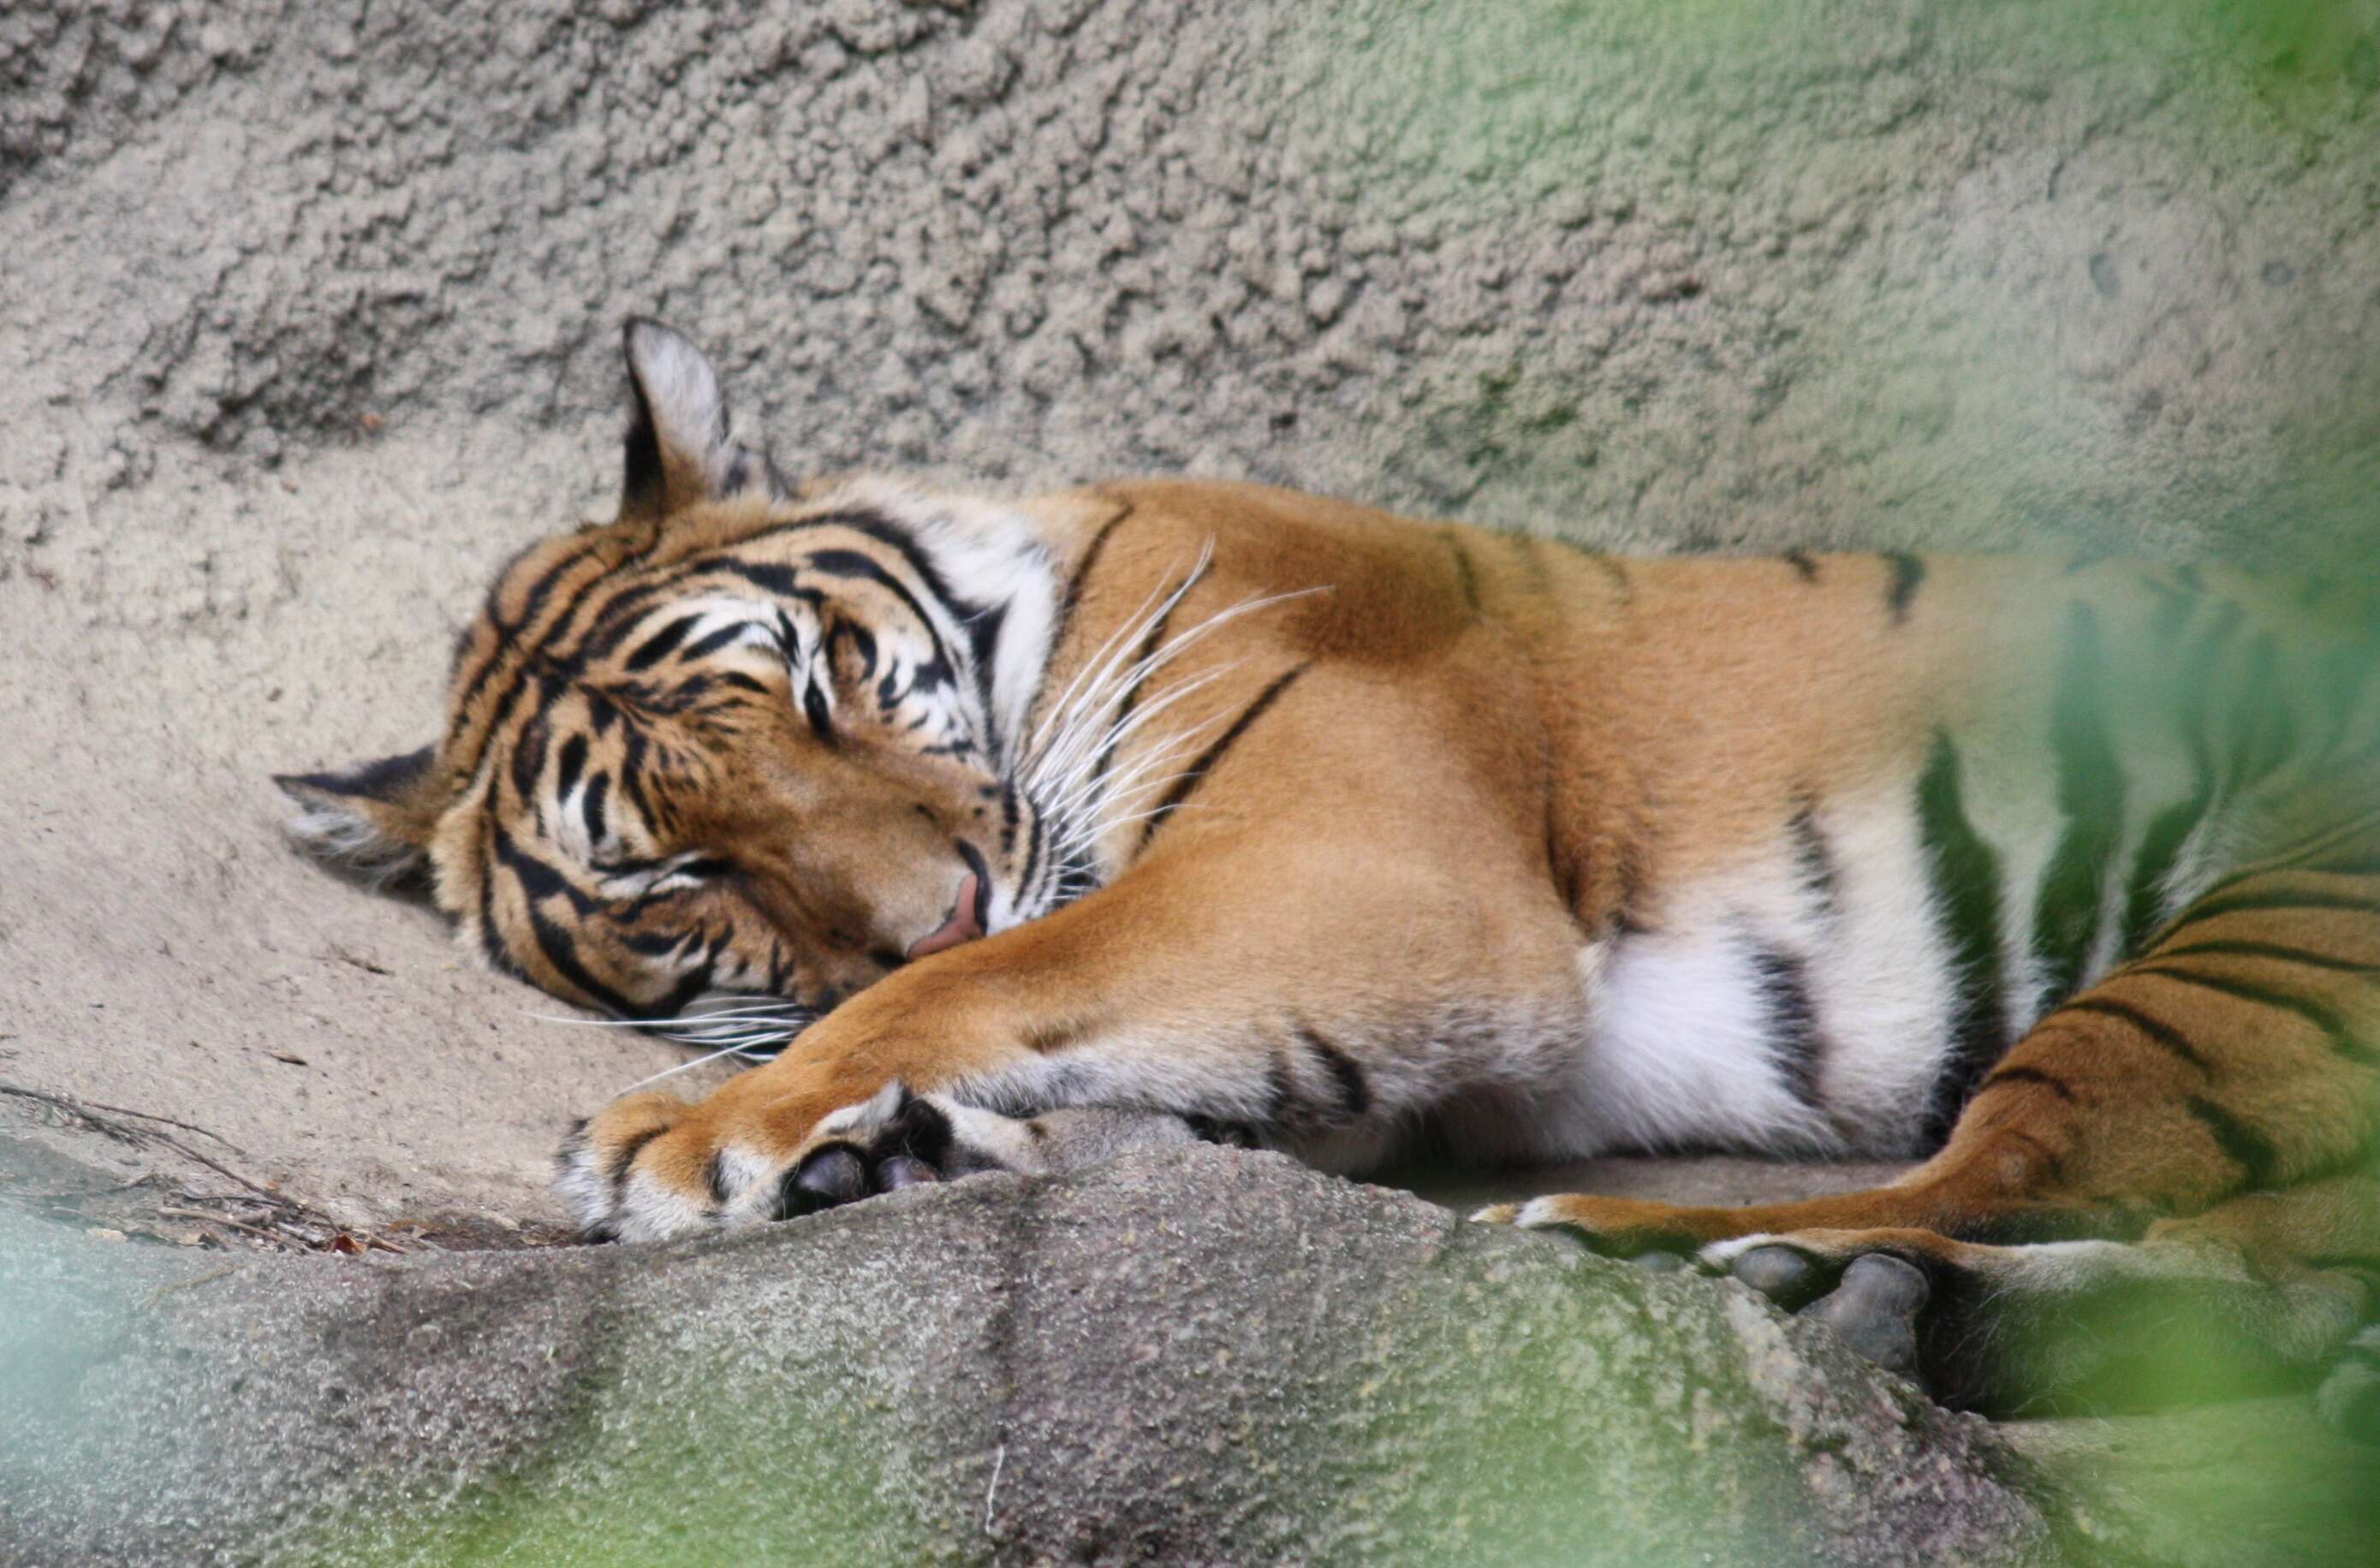 Image of Indochinese Tiger